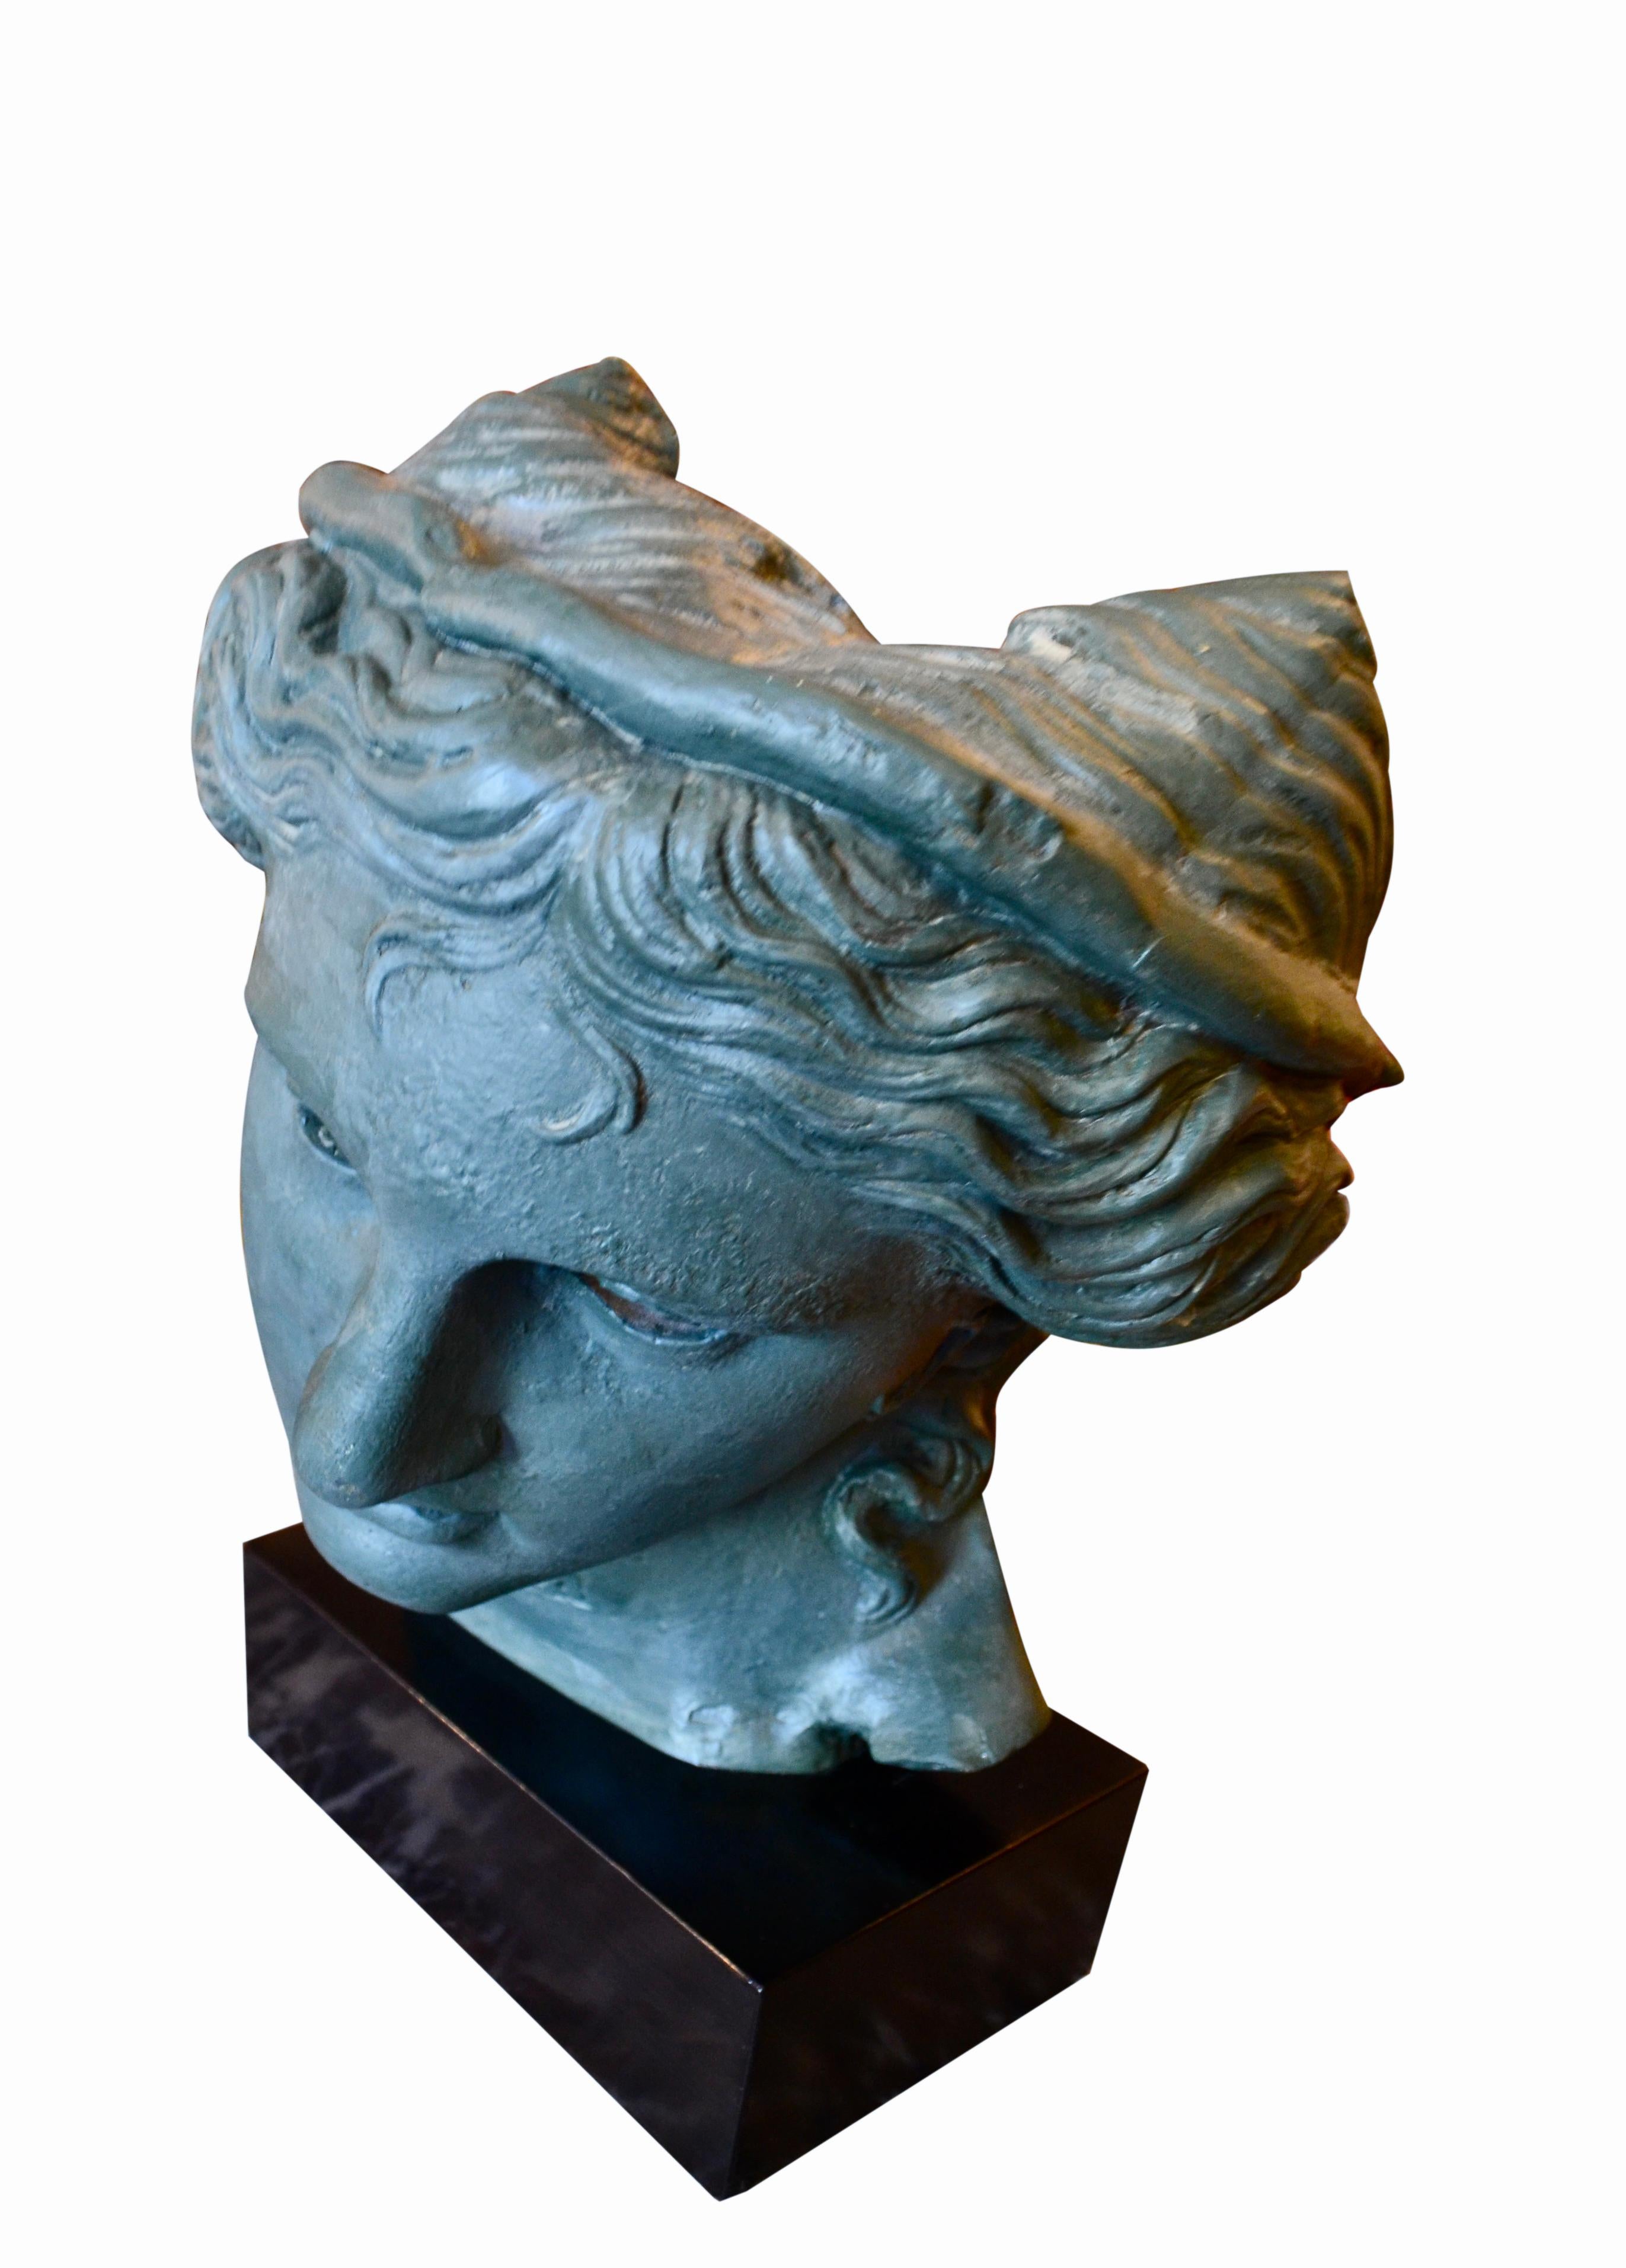 A  stylized classical  bronzed resin bust of Venus  after The Venus de Medici  a Hellenistic marble sculpture depicting the Greek Goddess of love Aphrodite.  The bust sits on an ebonized wooden base.

